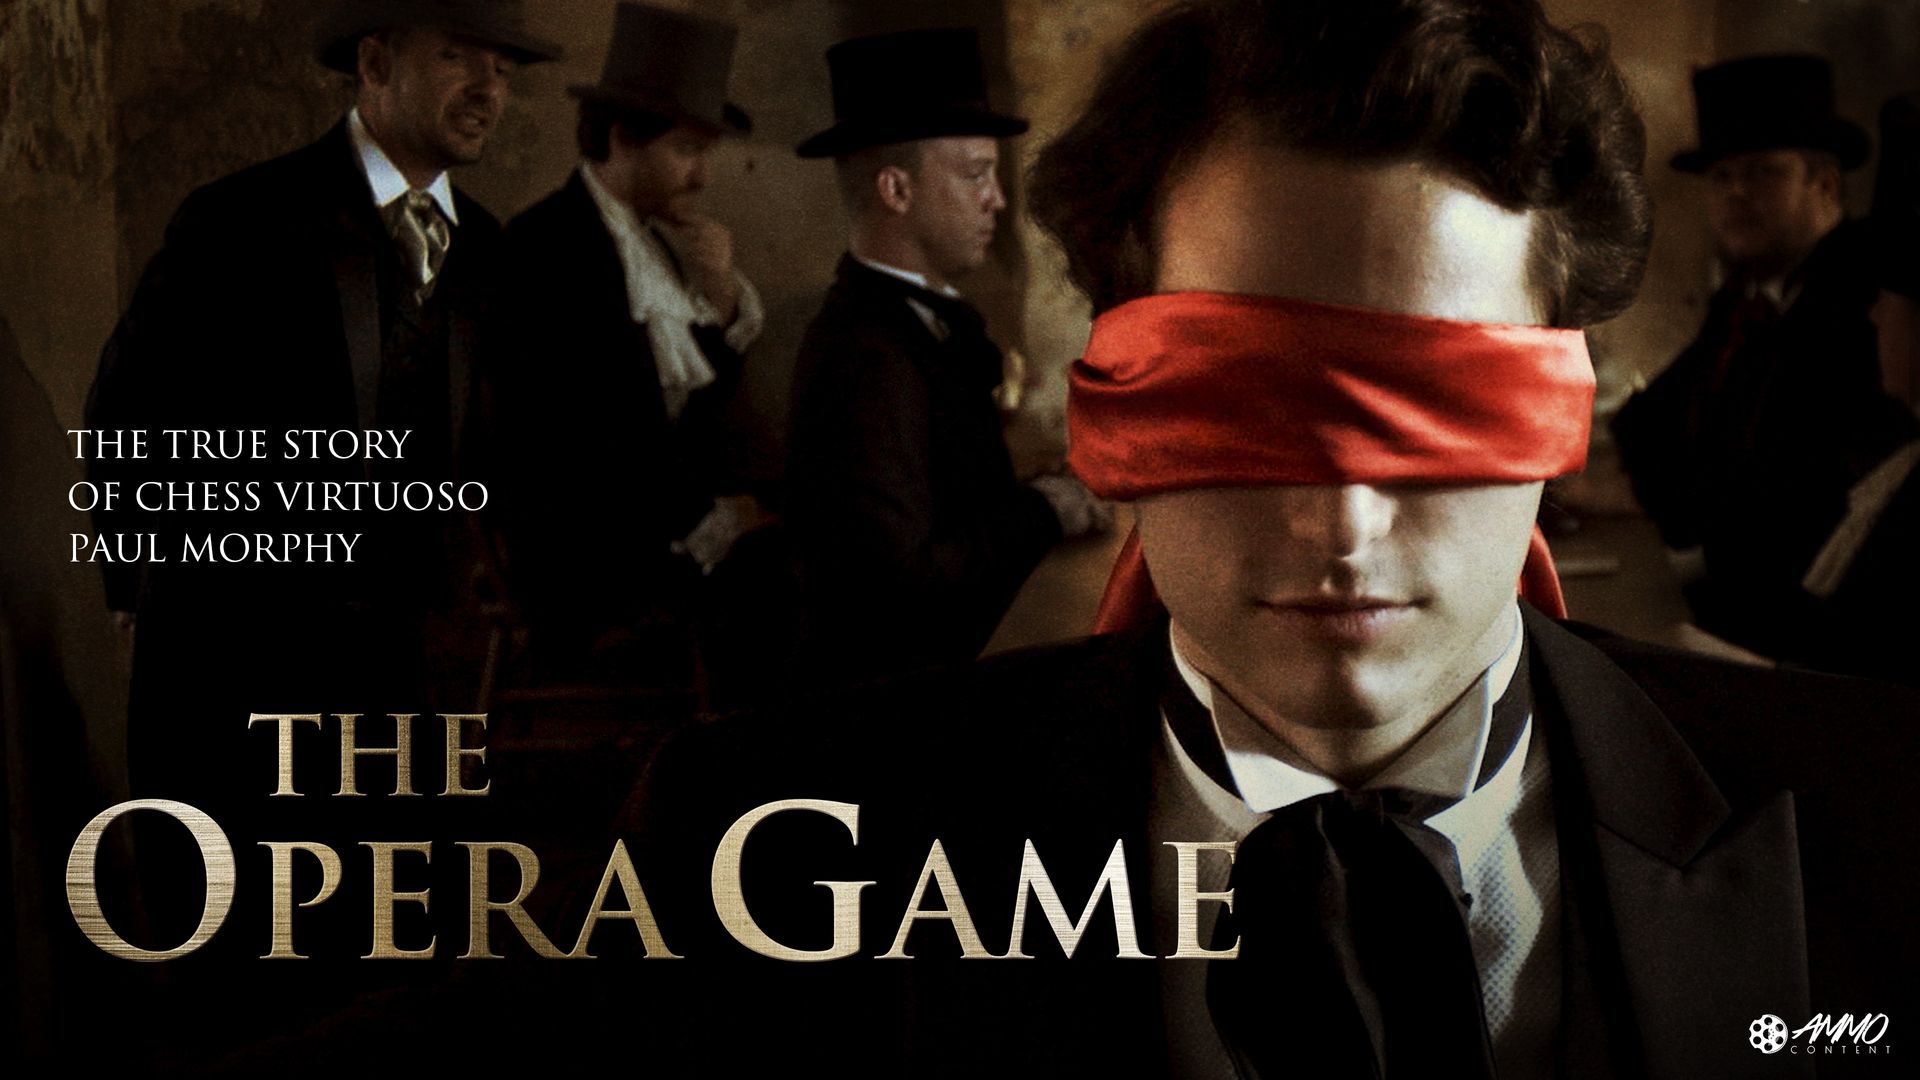 The Opera Game (2019): Where to Watch and Stream Online